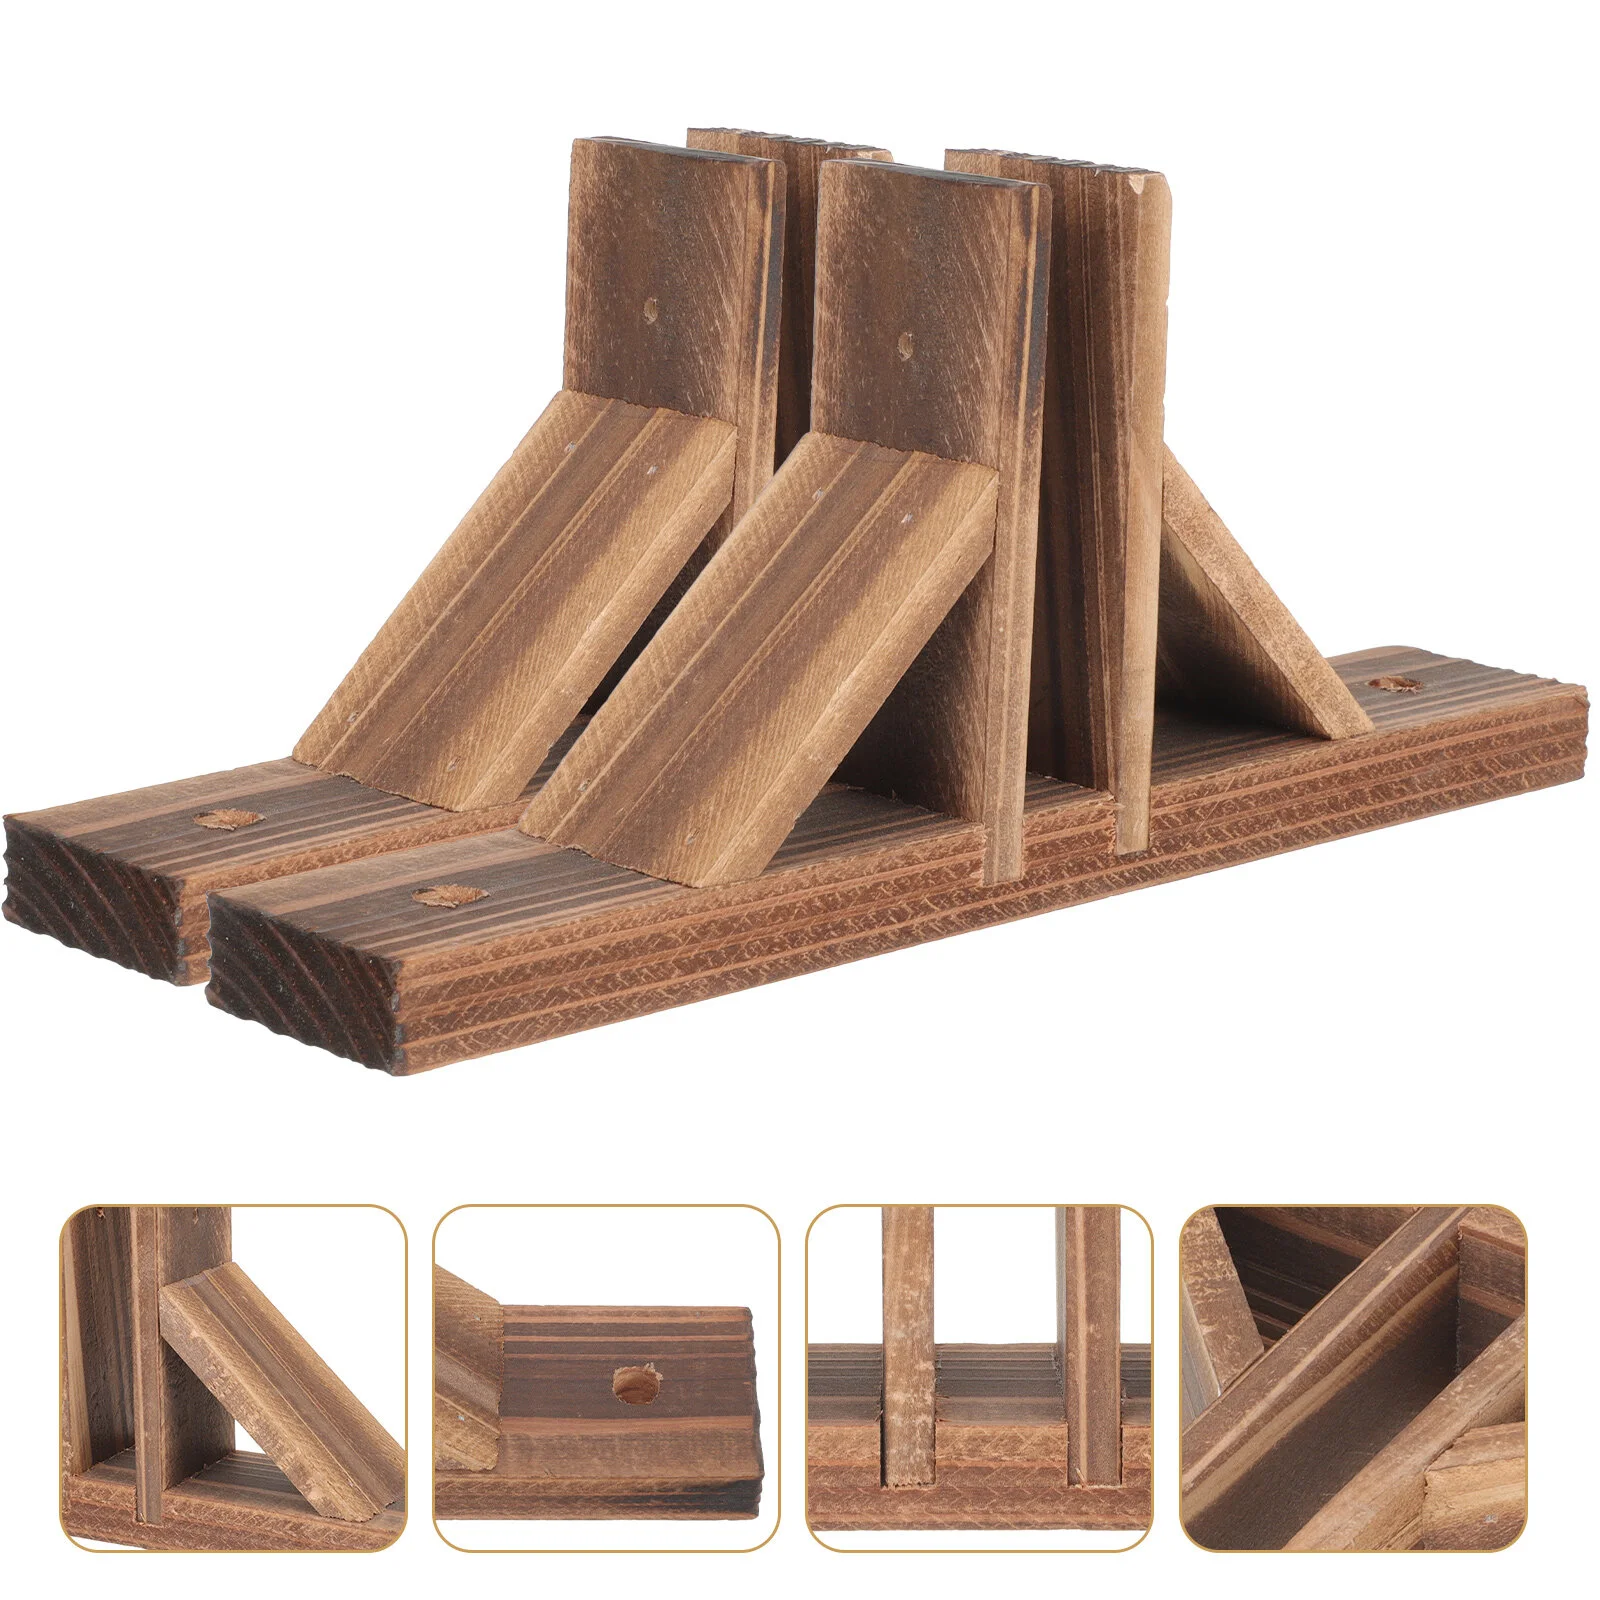 

2 Pcs Base Small Fence Durable Fences Set Wood Baby Playpen Bracket Yard Stand Holder Wooden Supplies Pet Outdoor